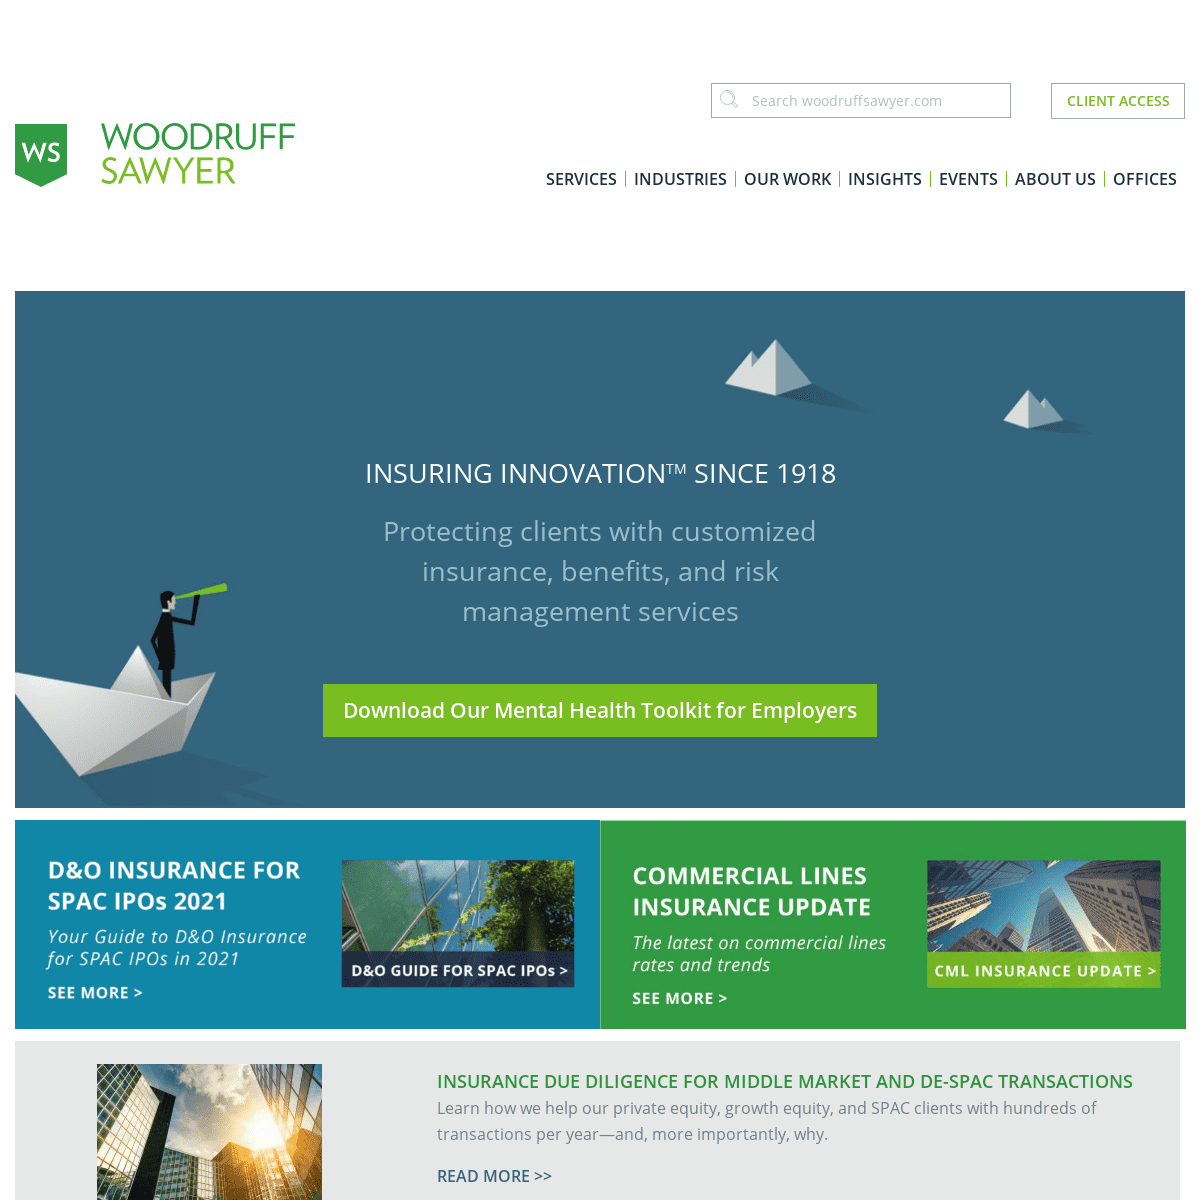 A complete backup of https://woodruffsawyer.com